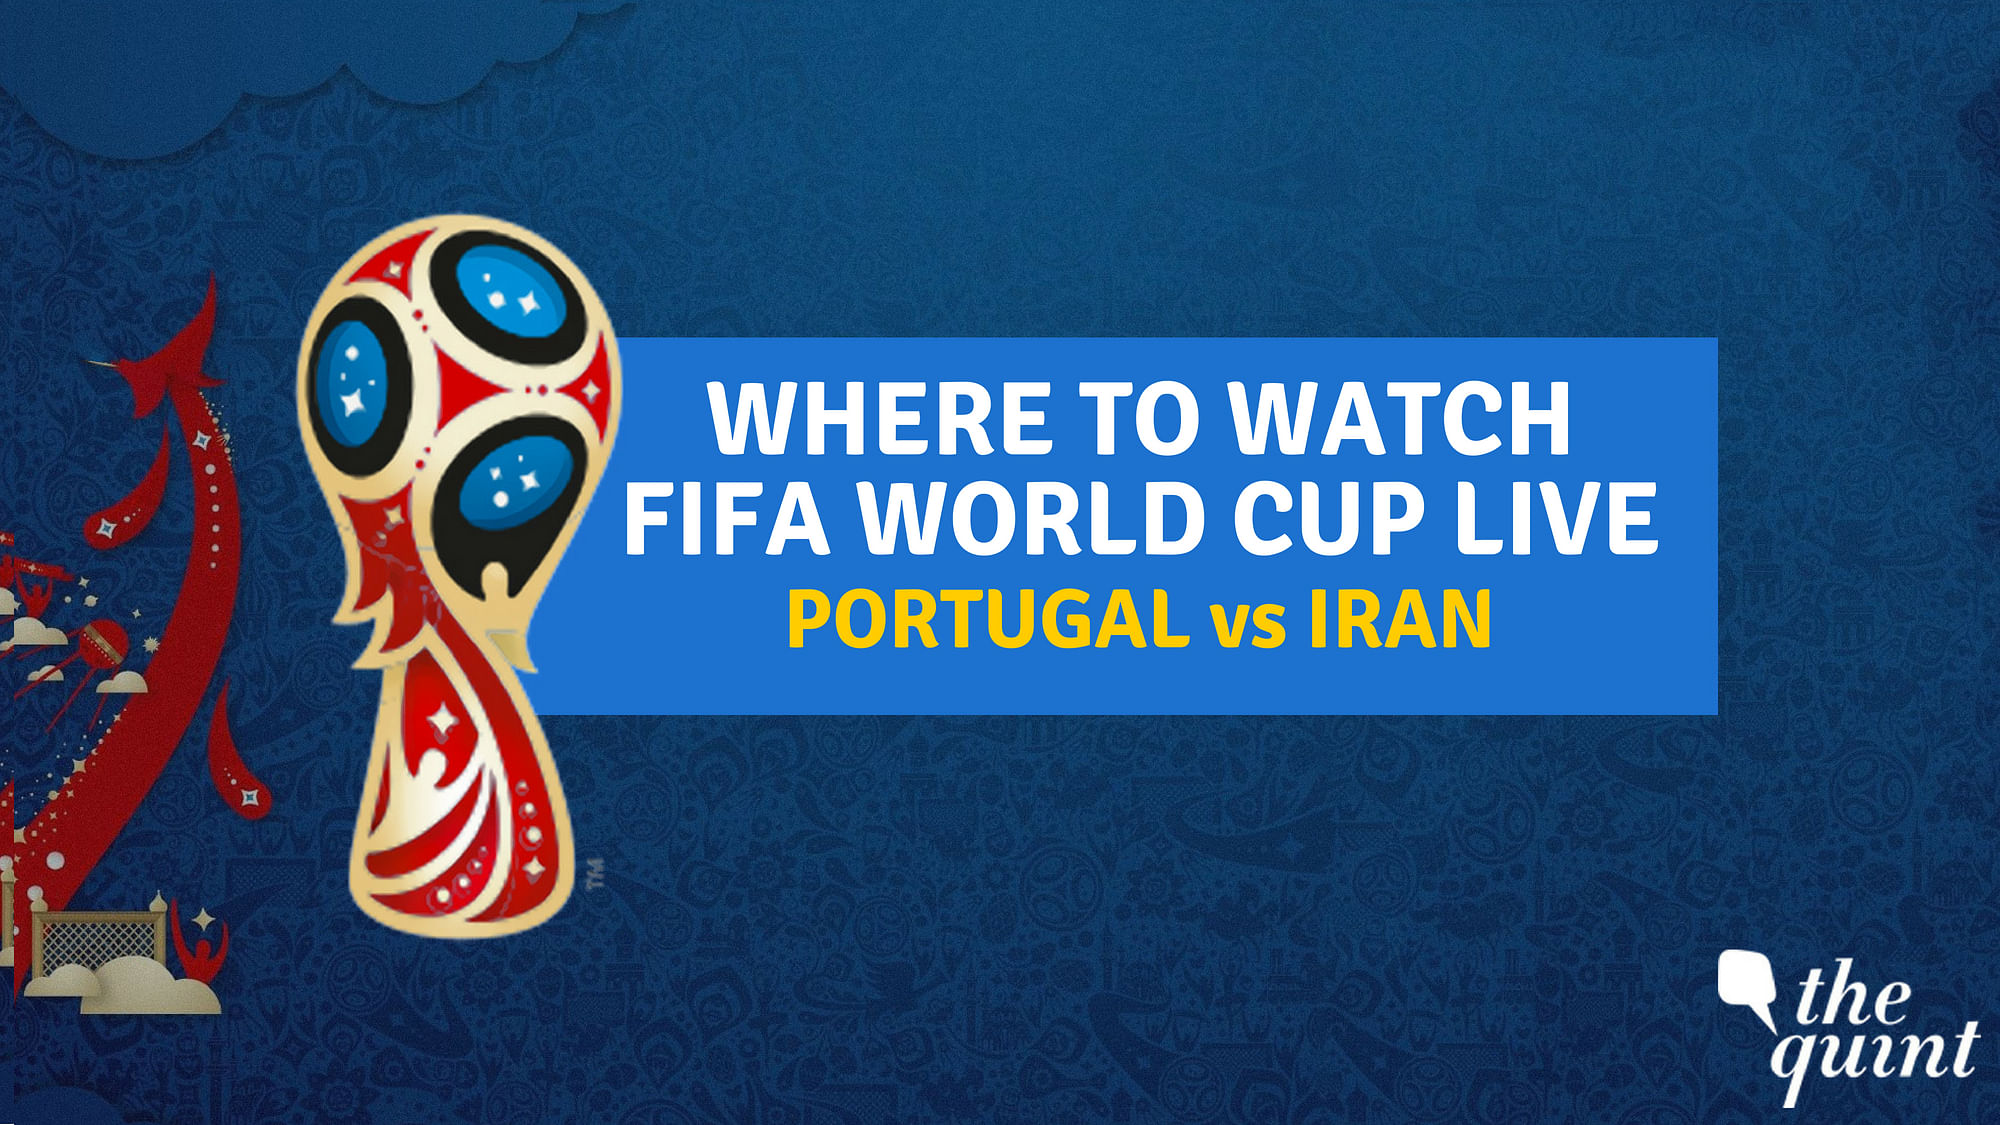 Portugal vs Iran FIFA World Cup 2018 Match will be played on 25 June.